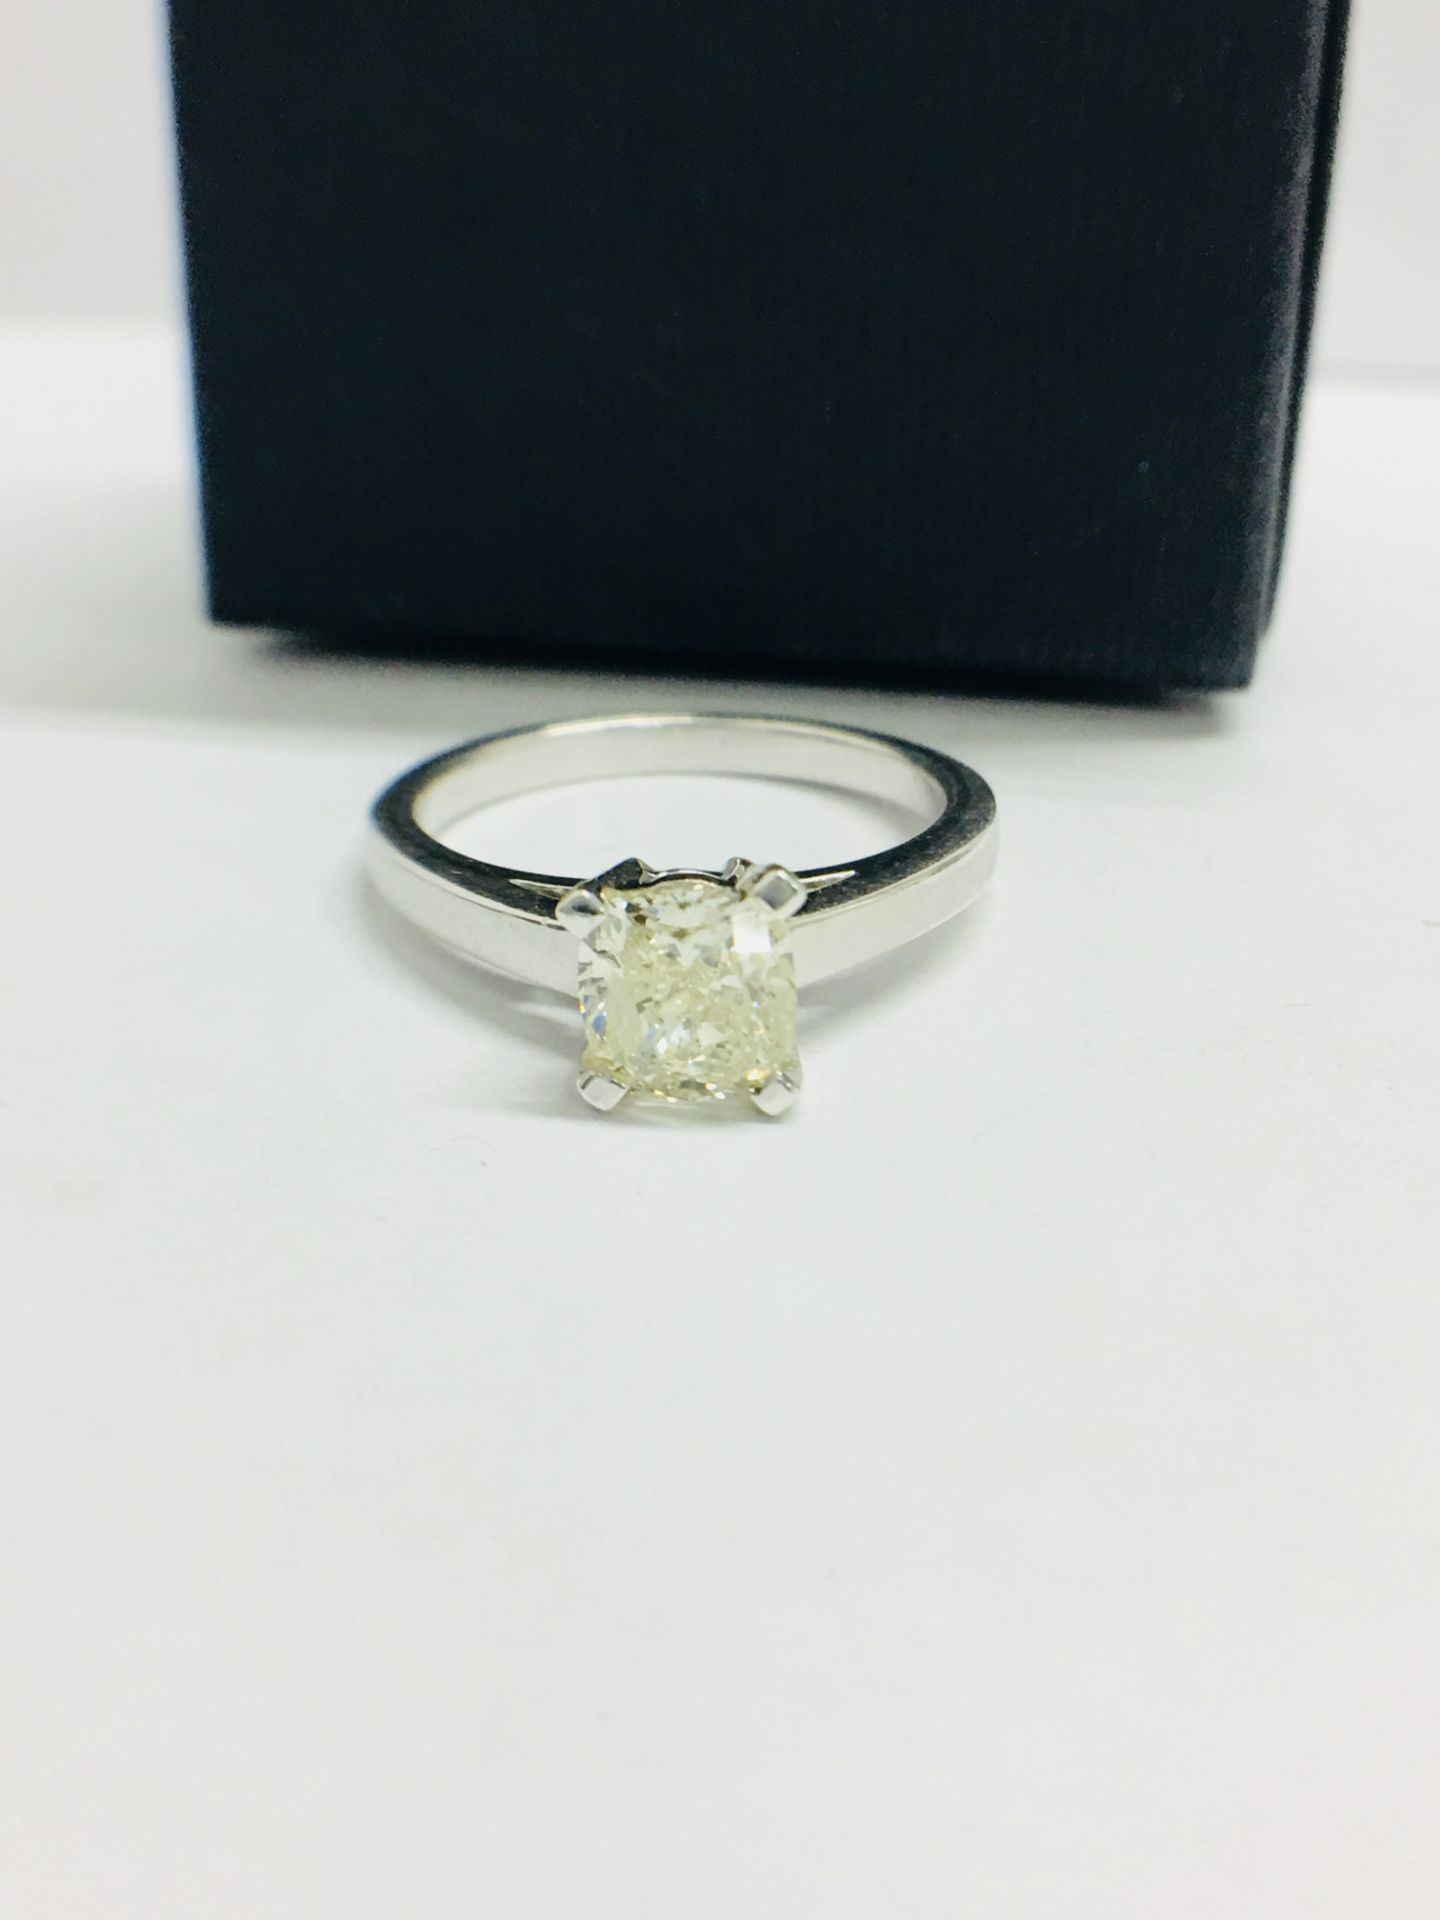 1.00ct diamond solitaire ring with a Cushion cut diamond. J colour and I1 clarity enhanced stone.